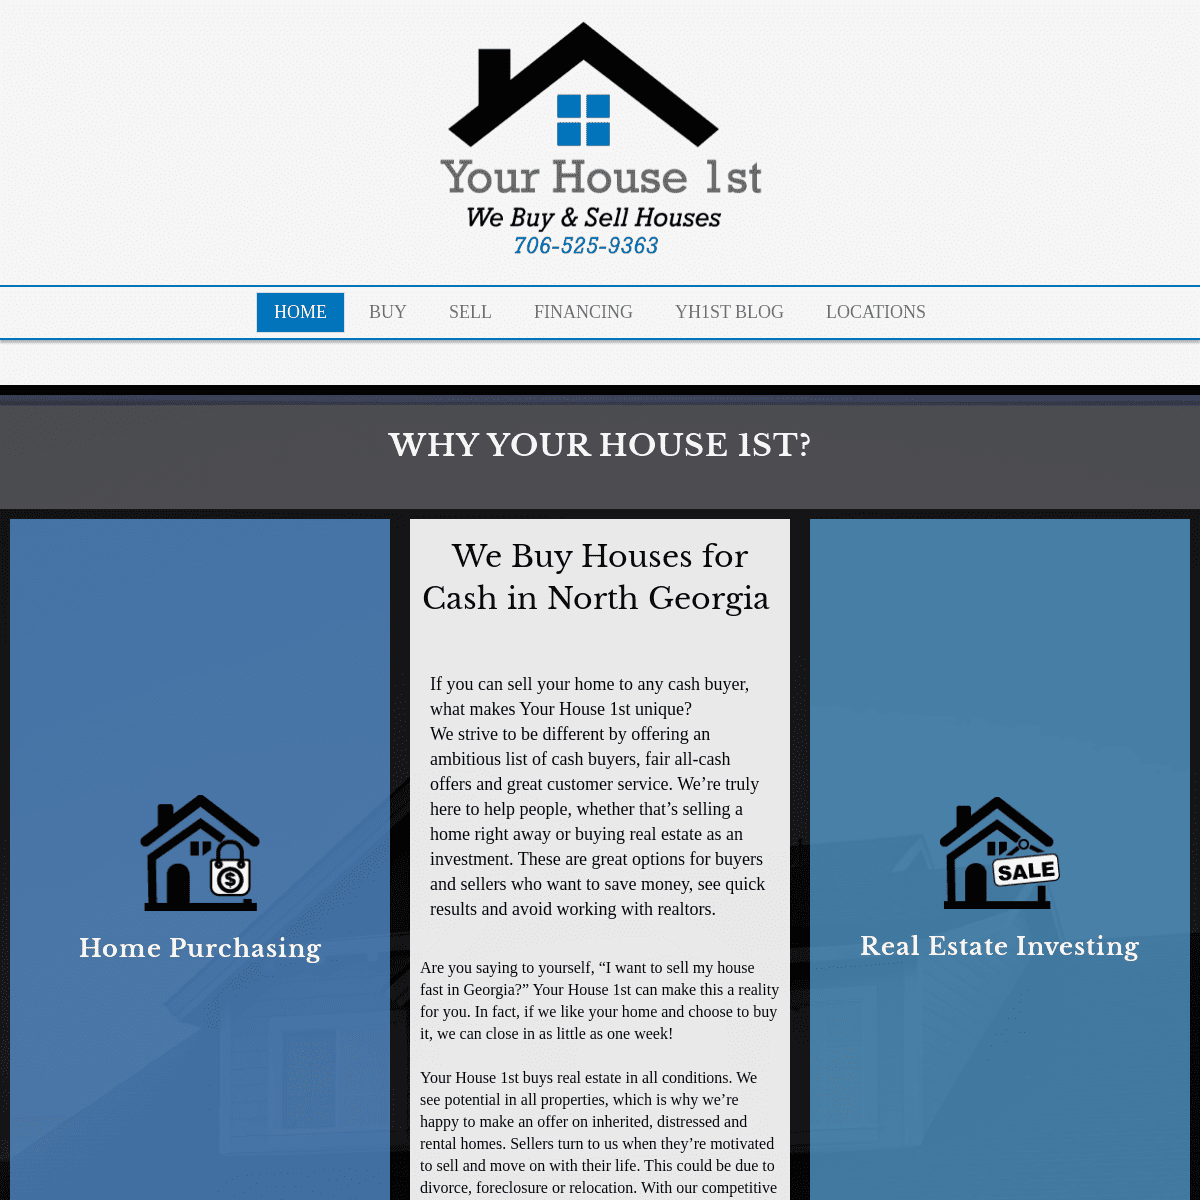 A complete backup of https://yourhouse1st.com